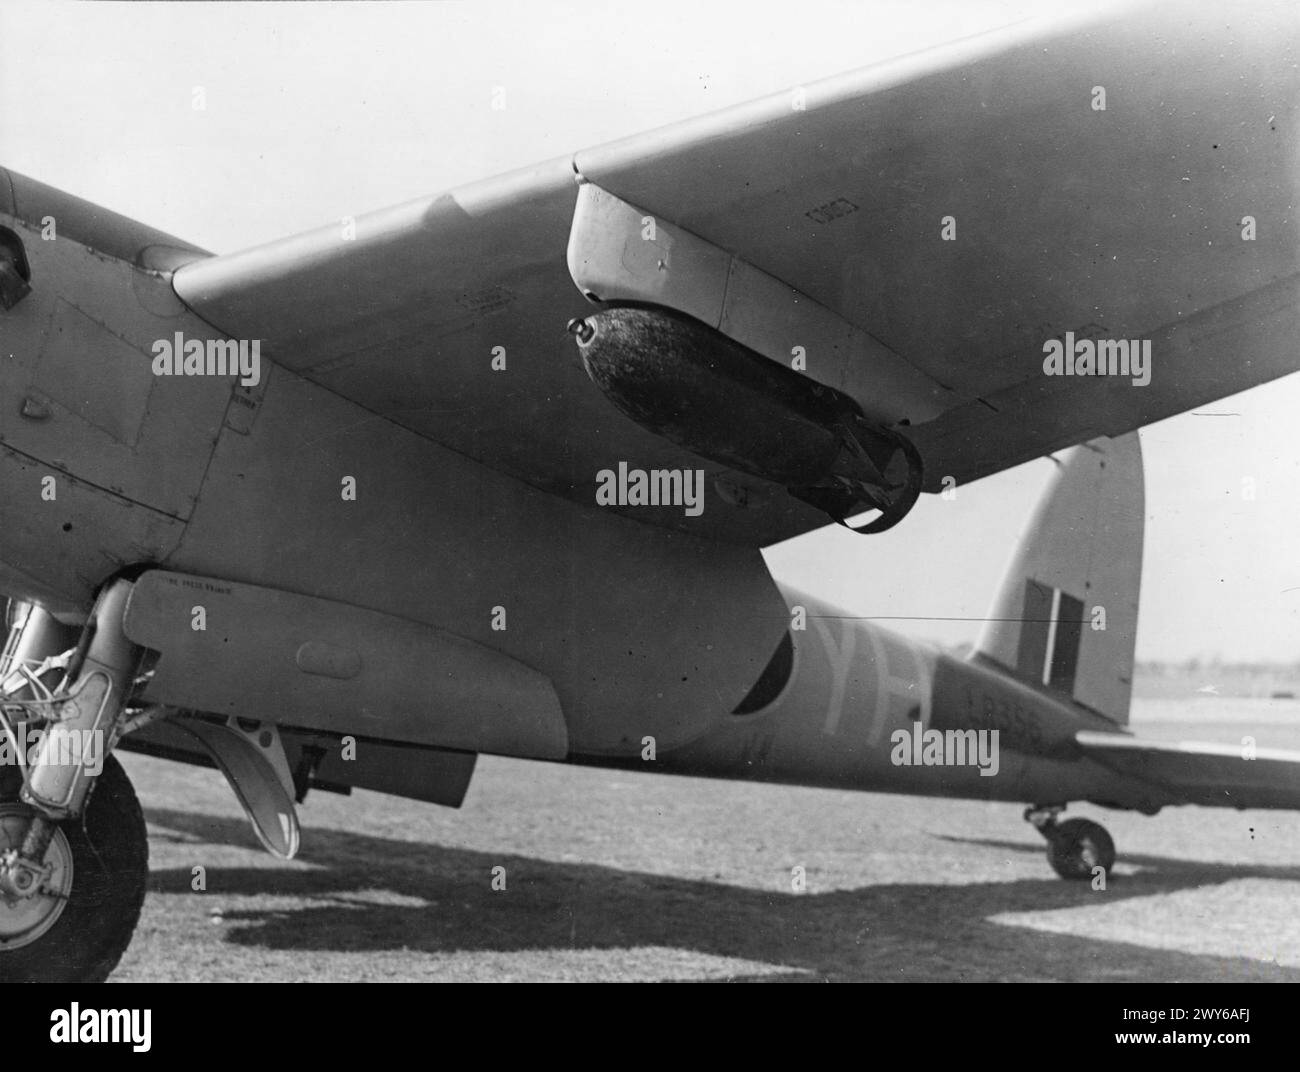 ROYAL AIR FORCE BOMBER COMMAND, 1942-1945. - A 250-lb GP bomb fitted to the port wing pylon of De Havilland Mosquito FB Mark VI, LR356 'YH-Y', of No. 21 Squadron RAF at Thorney Island, Hampshire. , Royal Air Force, Royal Air Force Regiment, Sqdn, 21, Royal Air Force, 2 Group Stock Photo